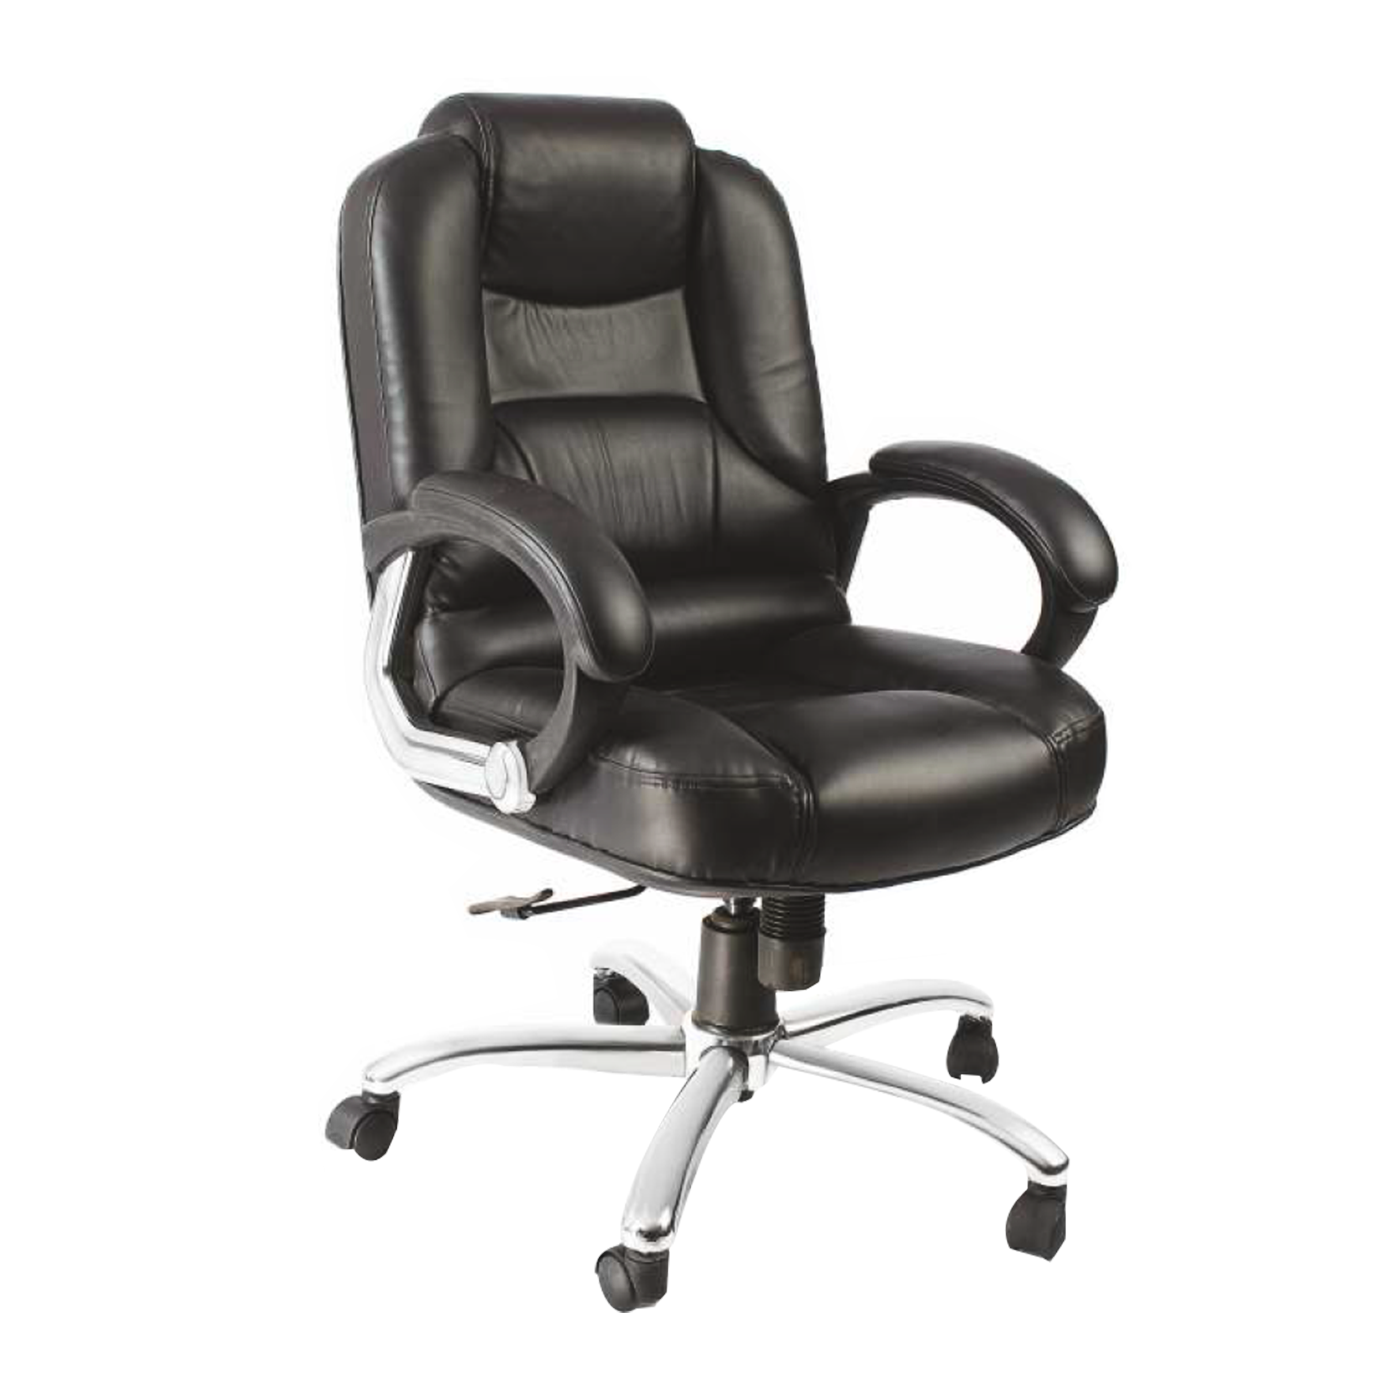 Detec™ Executive Low Back Chair , titled mechanism top cushion arm , Hydraulic chrome base